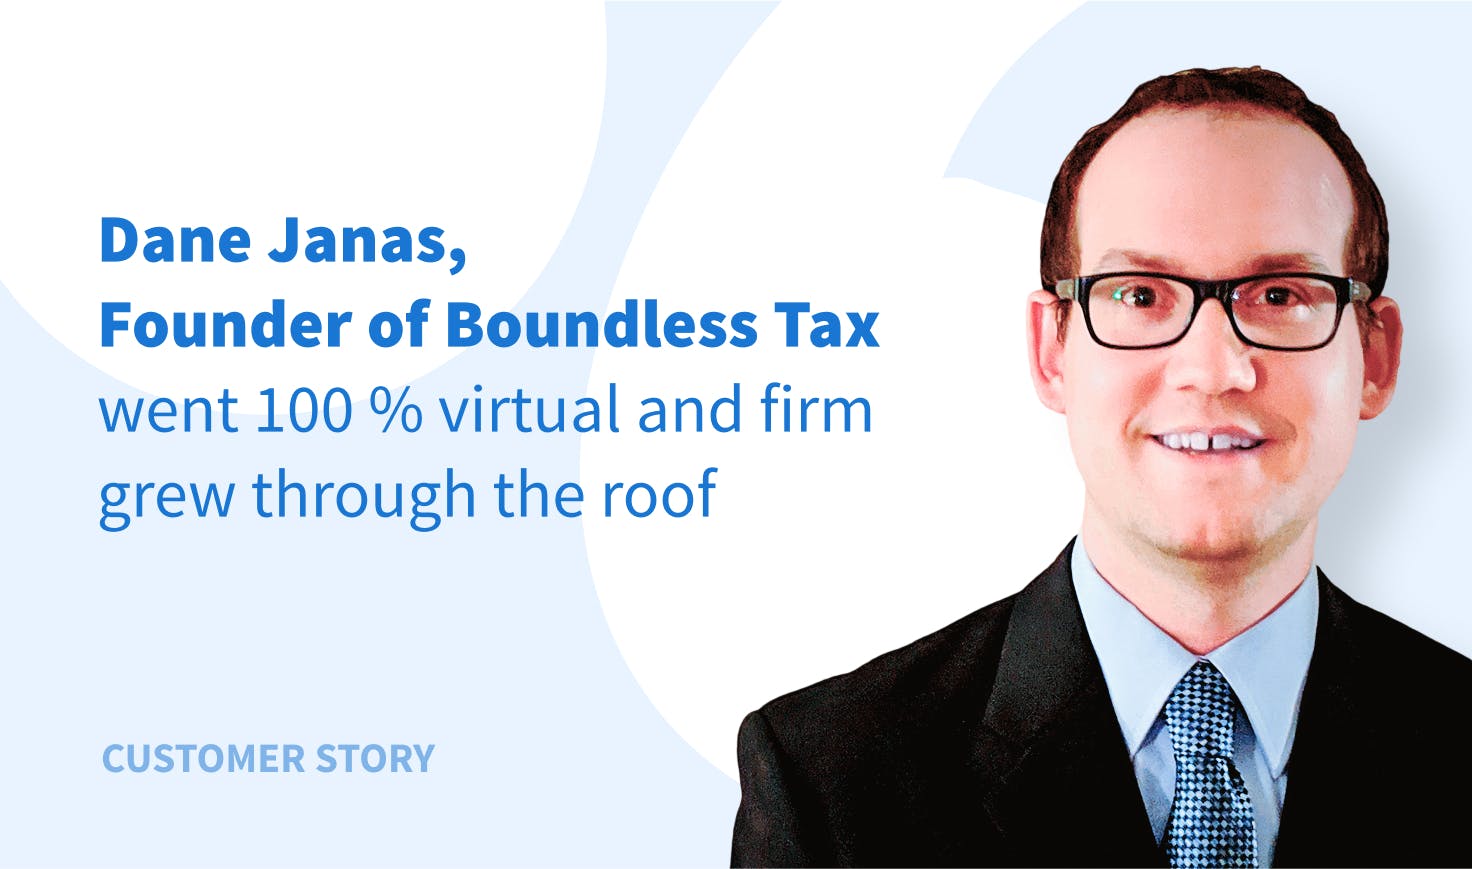 Boundless Tax Experience: How to Establish and Grow Your 100% Virtual Firm